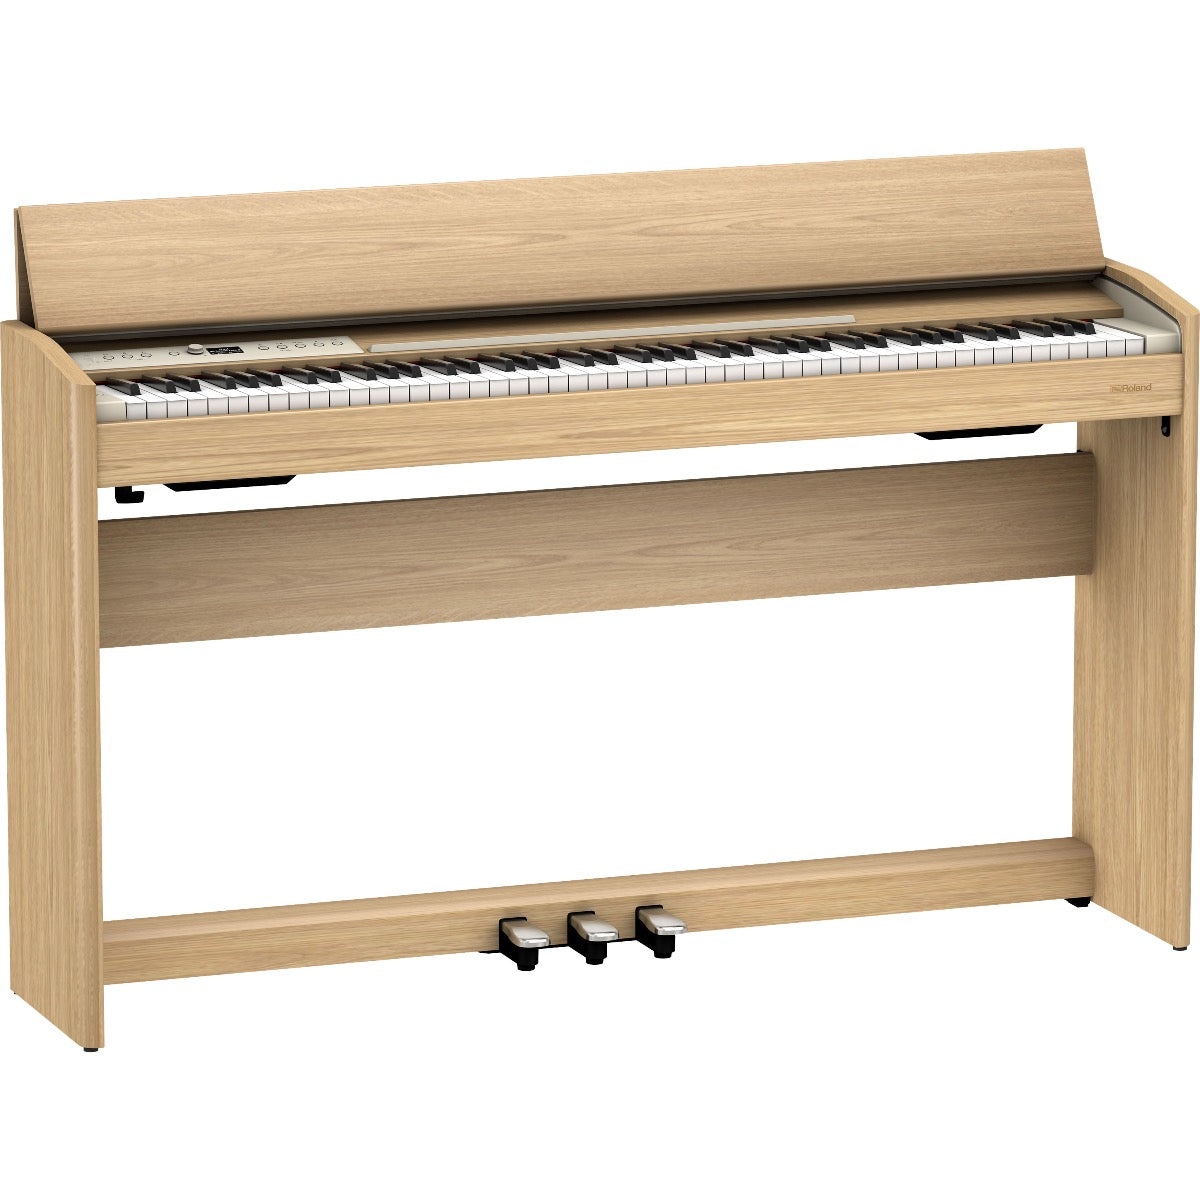 3/4 view of Roland F701 Digital Piano - Light Oak with key cover open showing front, top and left side